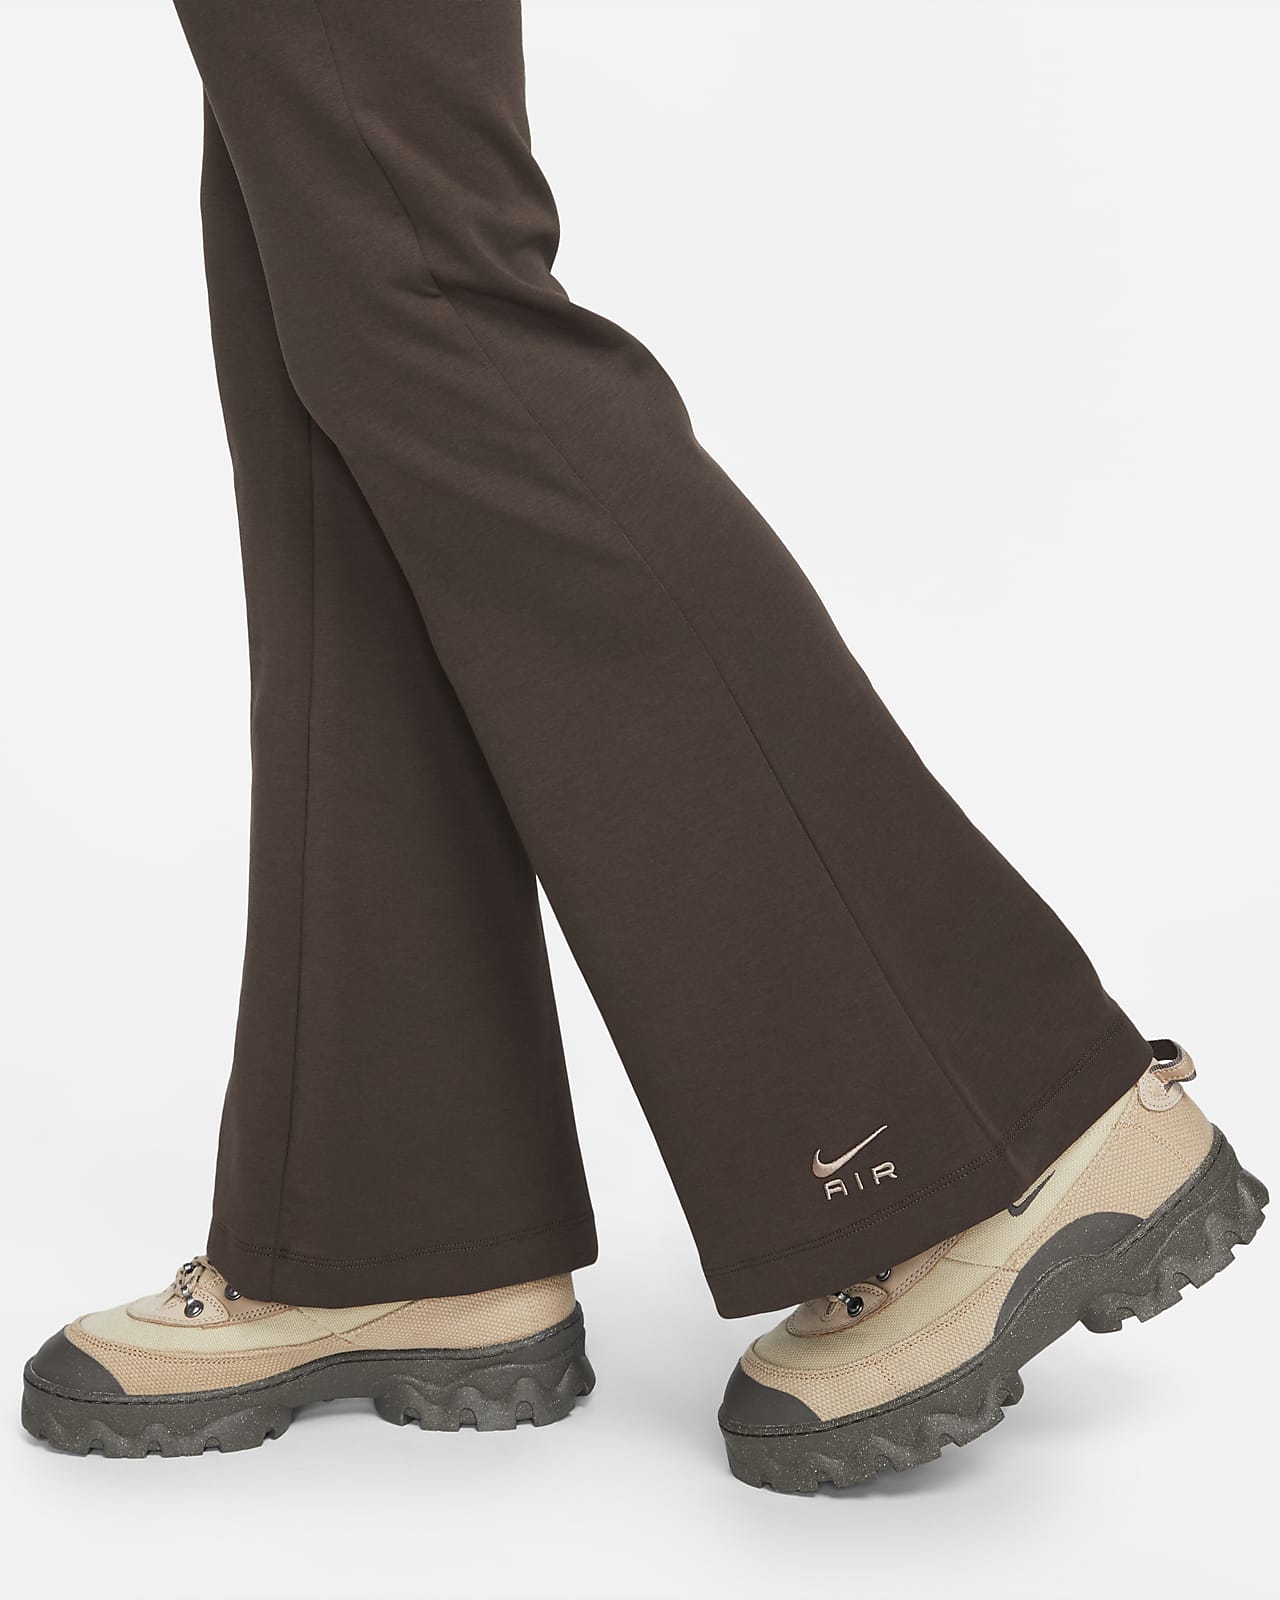 Nike Flare Yoga Pants Brown Size M - $21 (16% Off Retail) - From Emerson